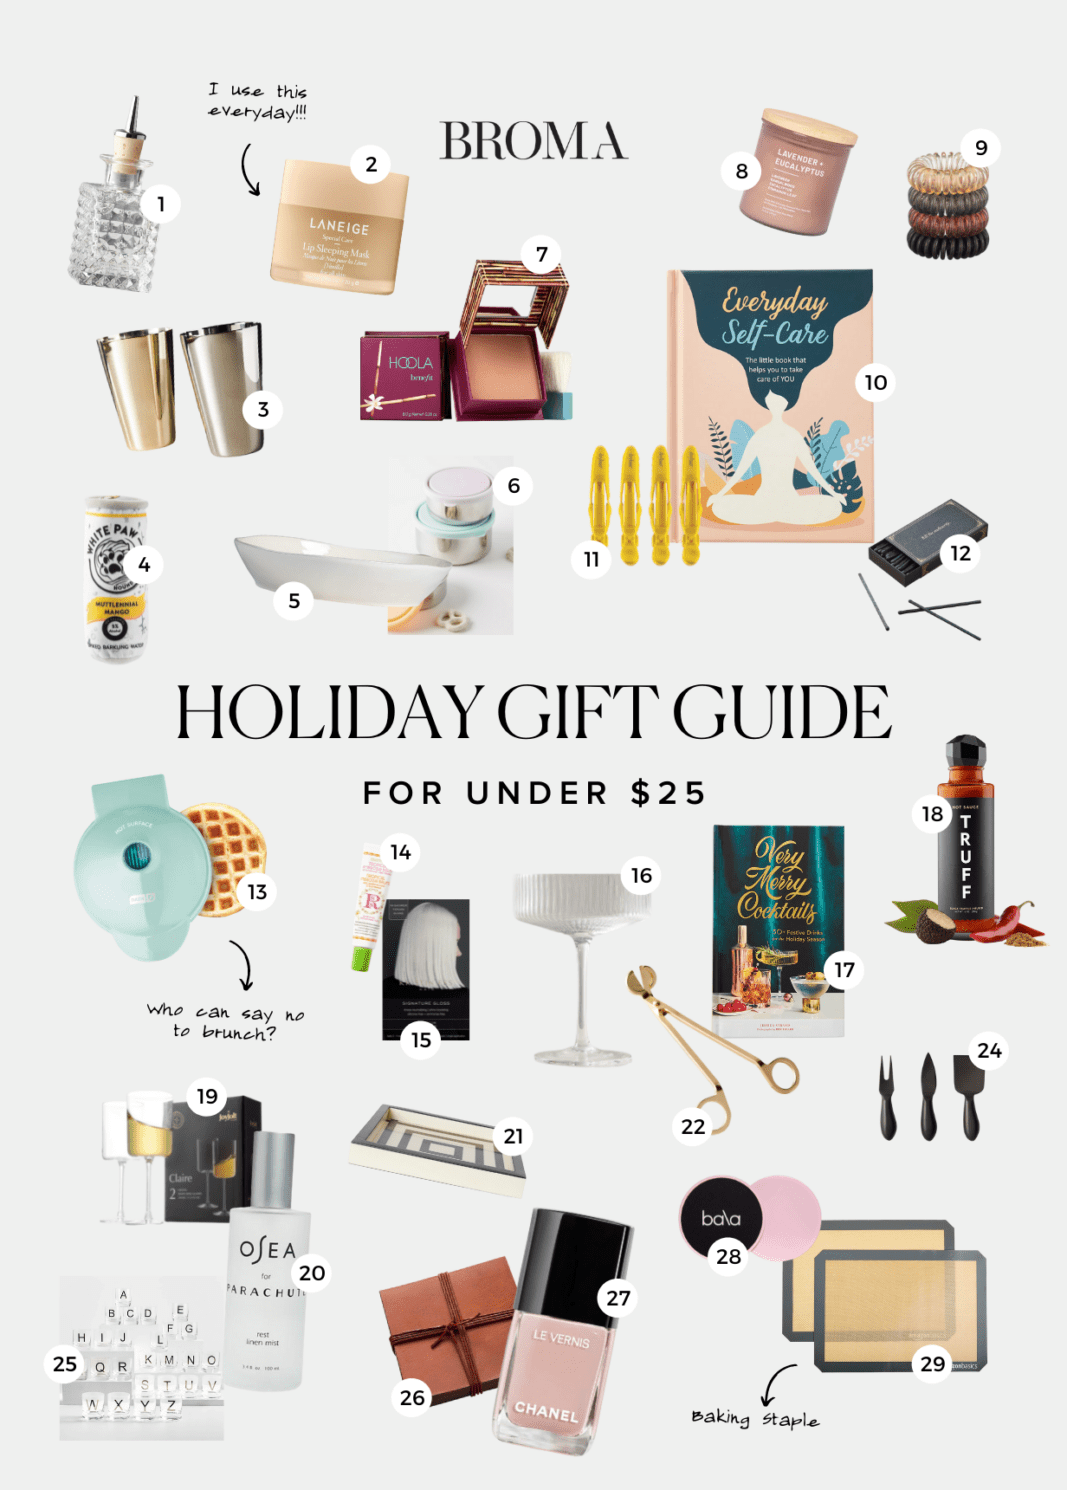 https://bromabakery.com/wp-content/uploads/2021/11/HOLIDAY-GIFT-GUIDE-7-1067x1490.webp